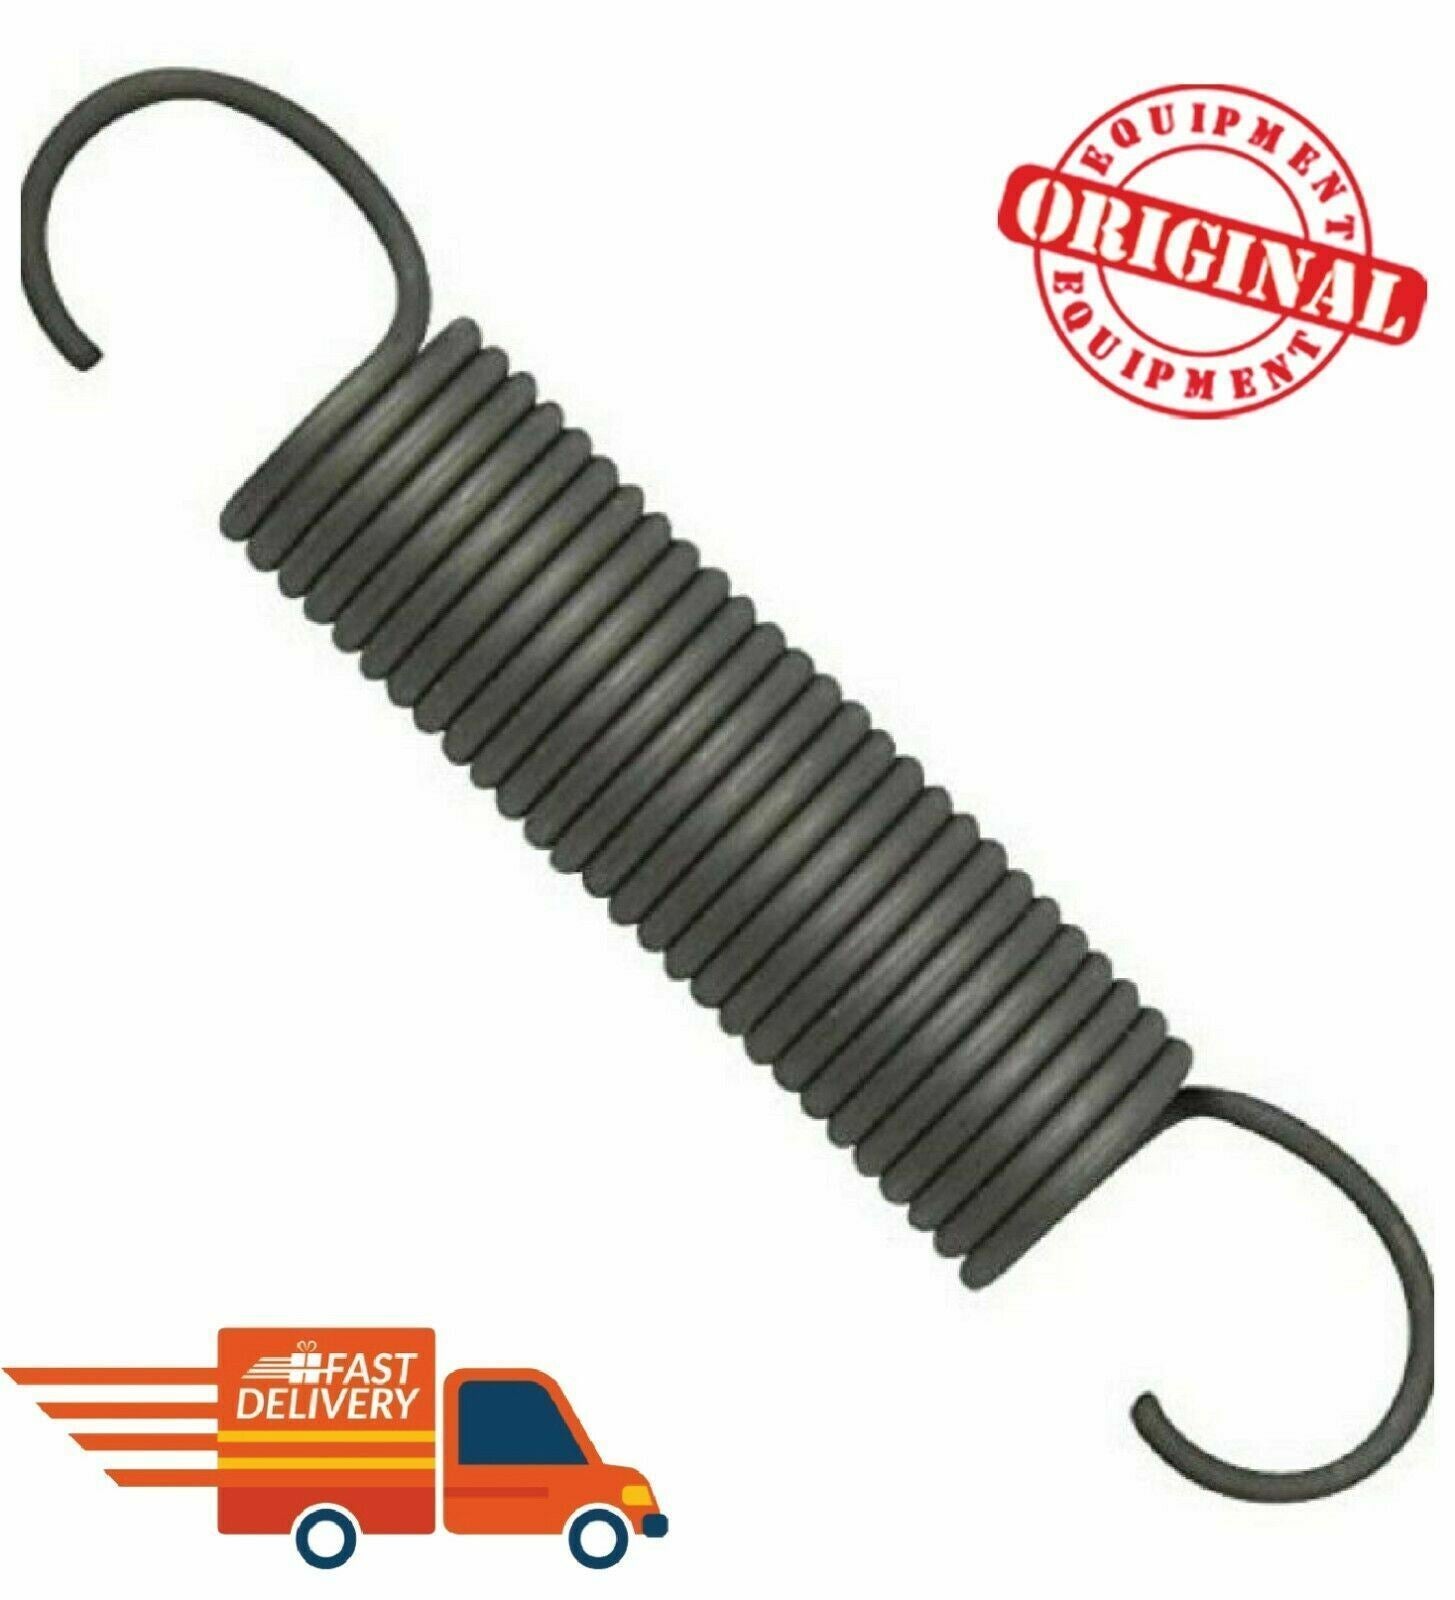 Genuine OEM 8316845 Whirlpool Washer Spring, Factory Certified, Made In USA!